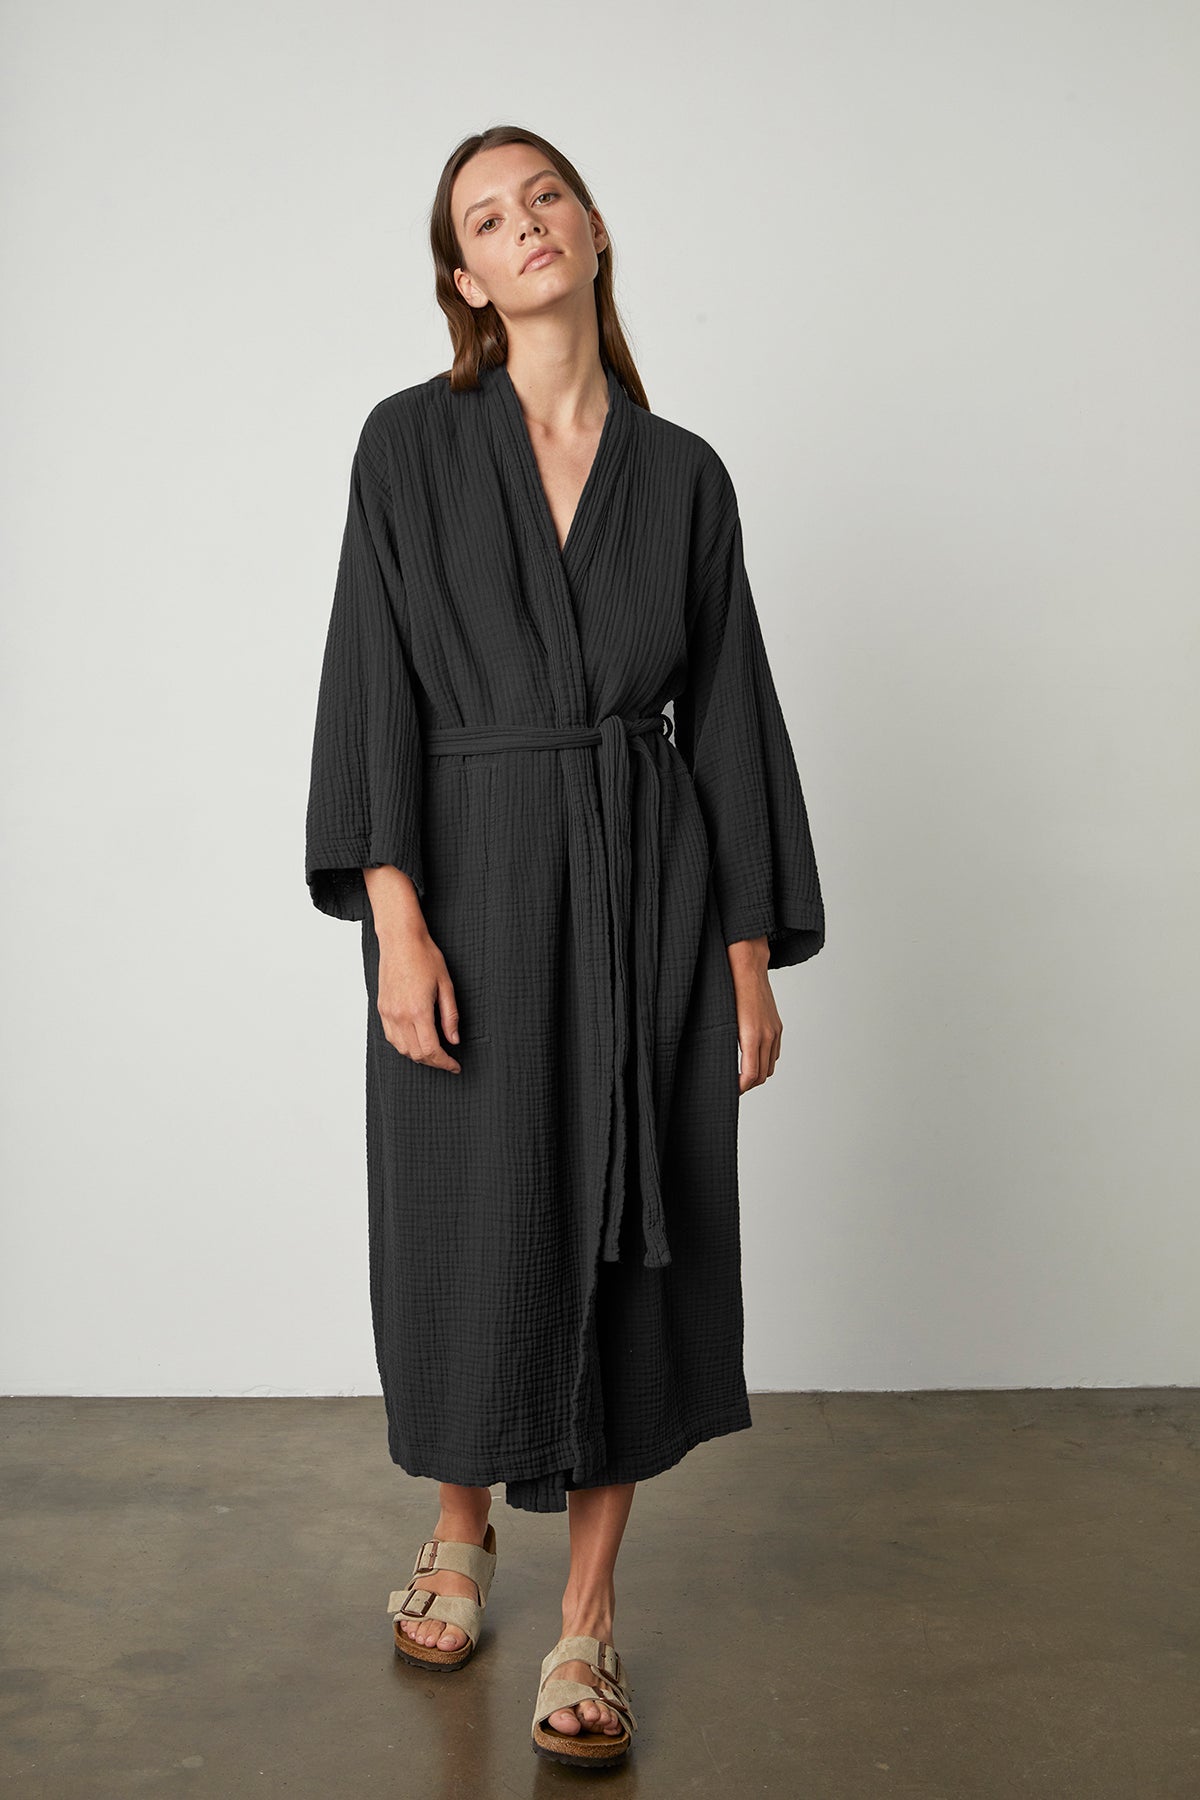 A woman wearing a black Cotton Gauze Robe by Jenny Graham Home and sandals.-23556237983937